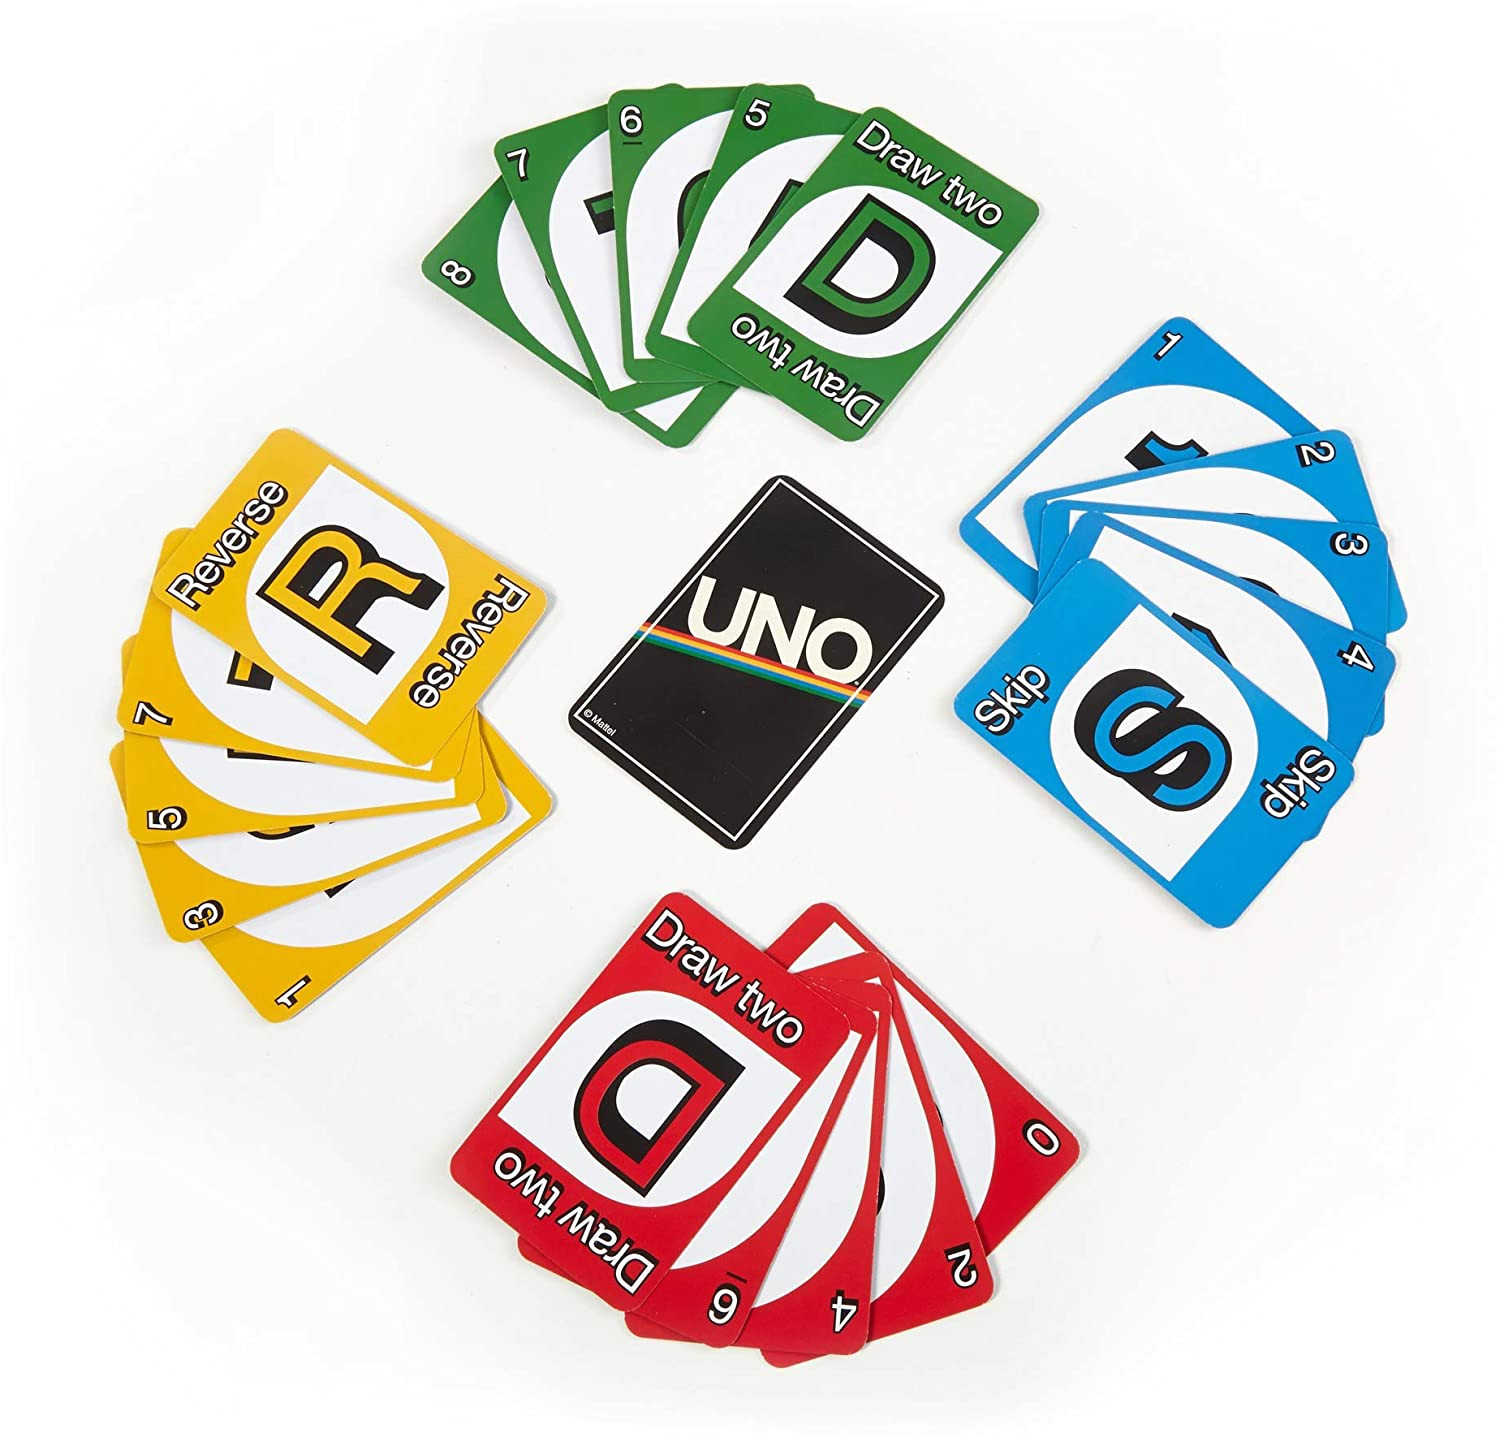 image result for uno card template uno cards 1st boy - blank uno card ...